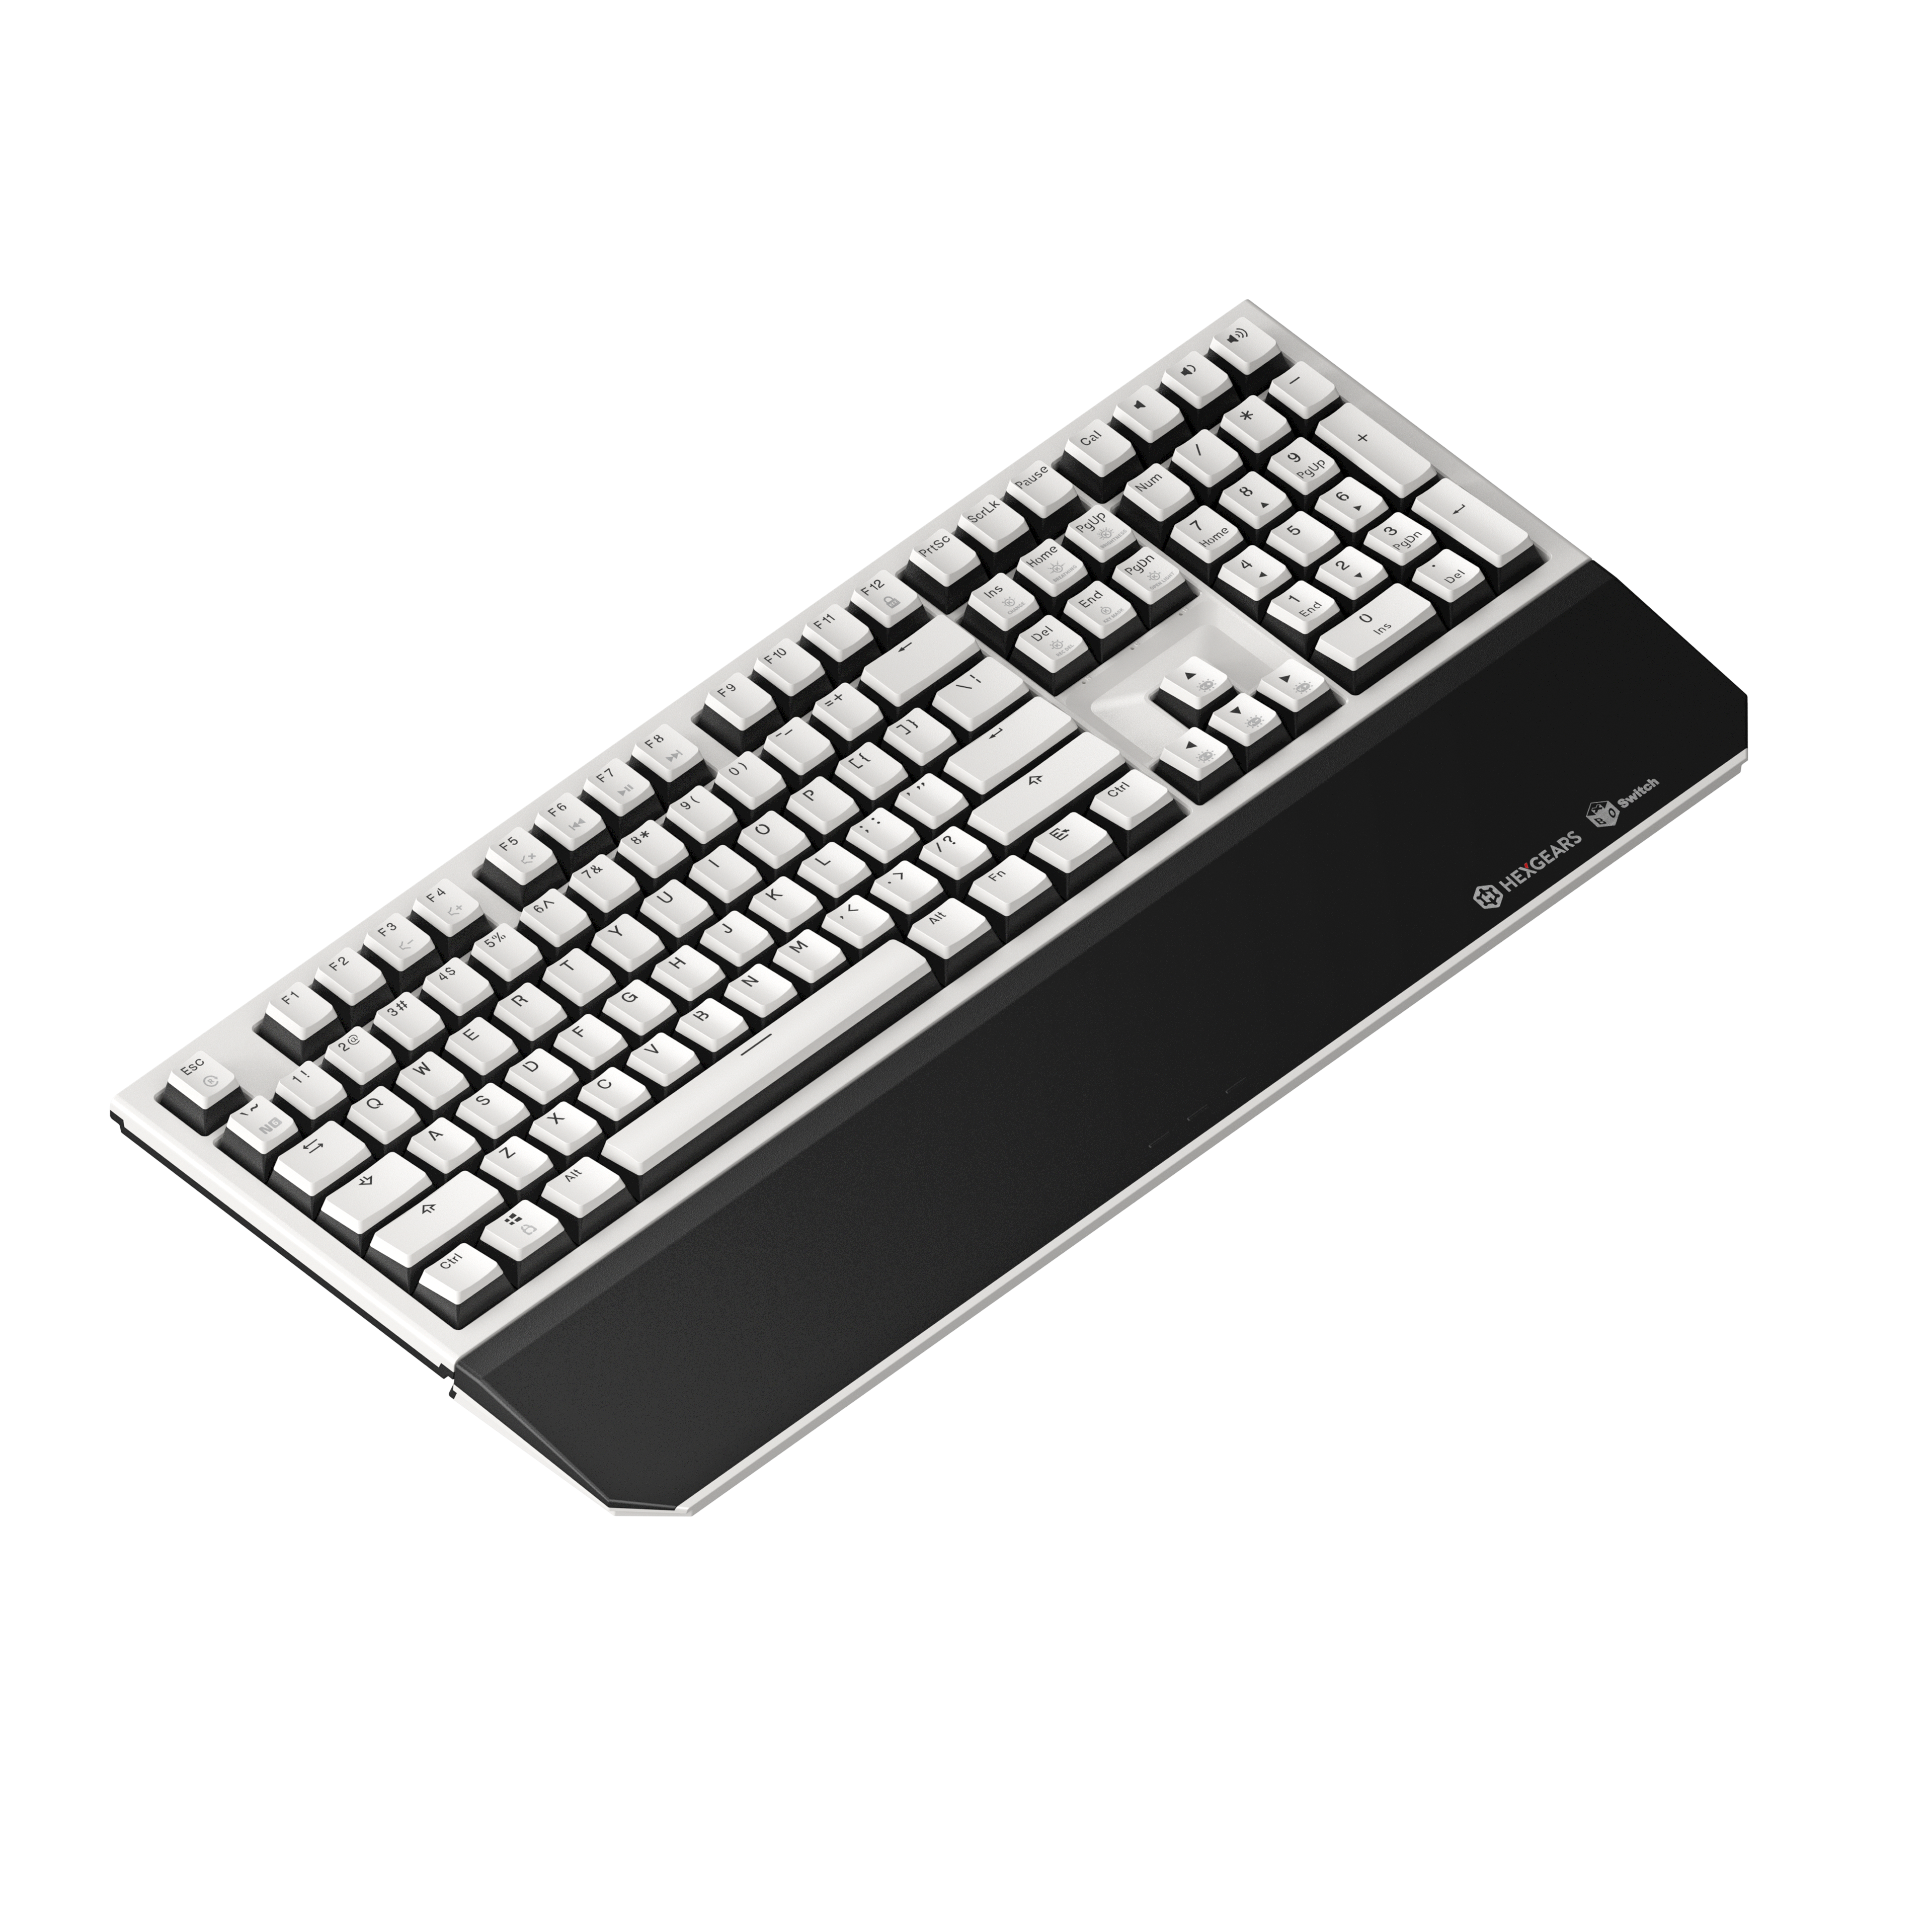 Hexgears G5 2.4G Wireless Mechanical Keyboard 104 Key， Wireless and Type-C Wired Connection, 100% Full-Size, Blue LED Backlit, Windows and Mac OS Com